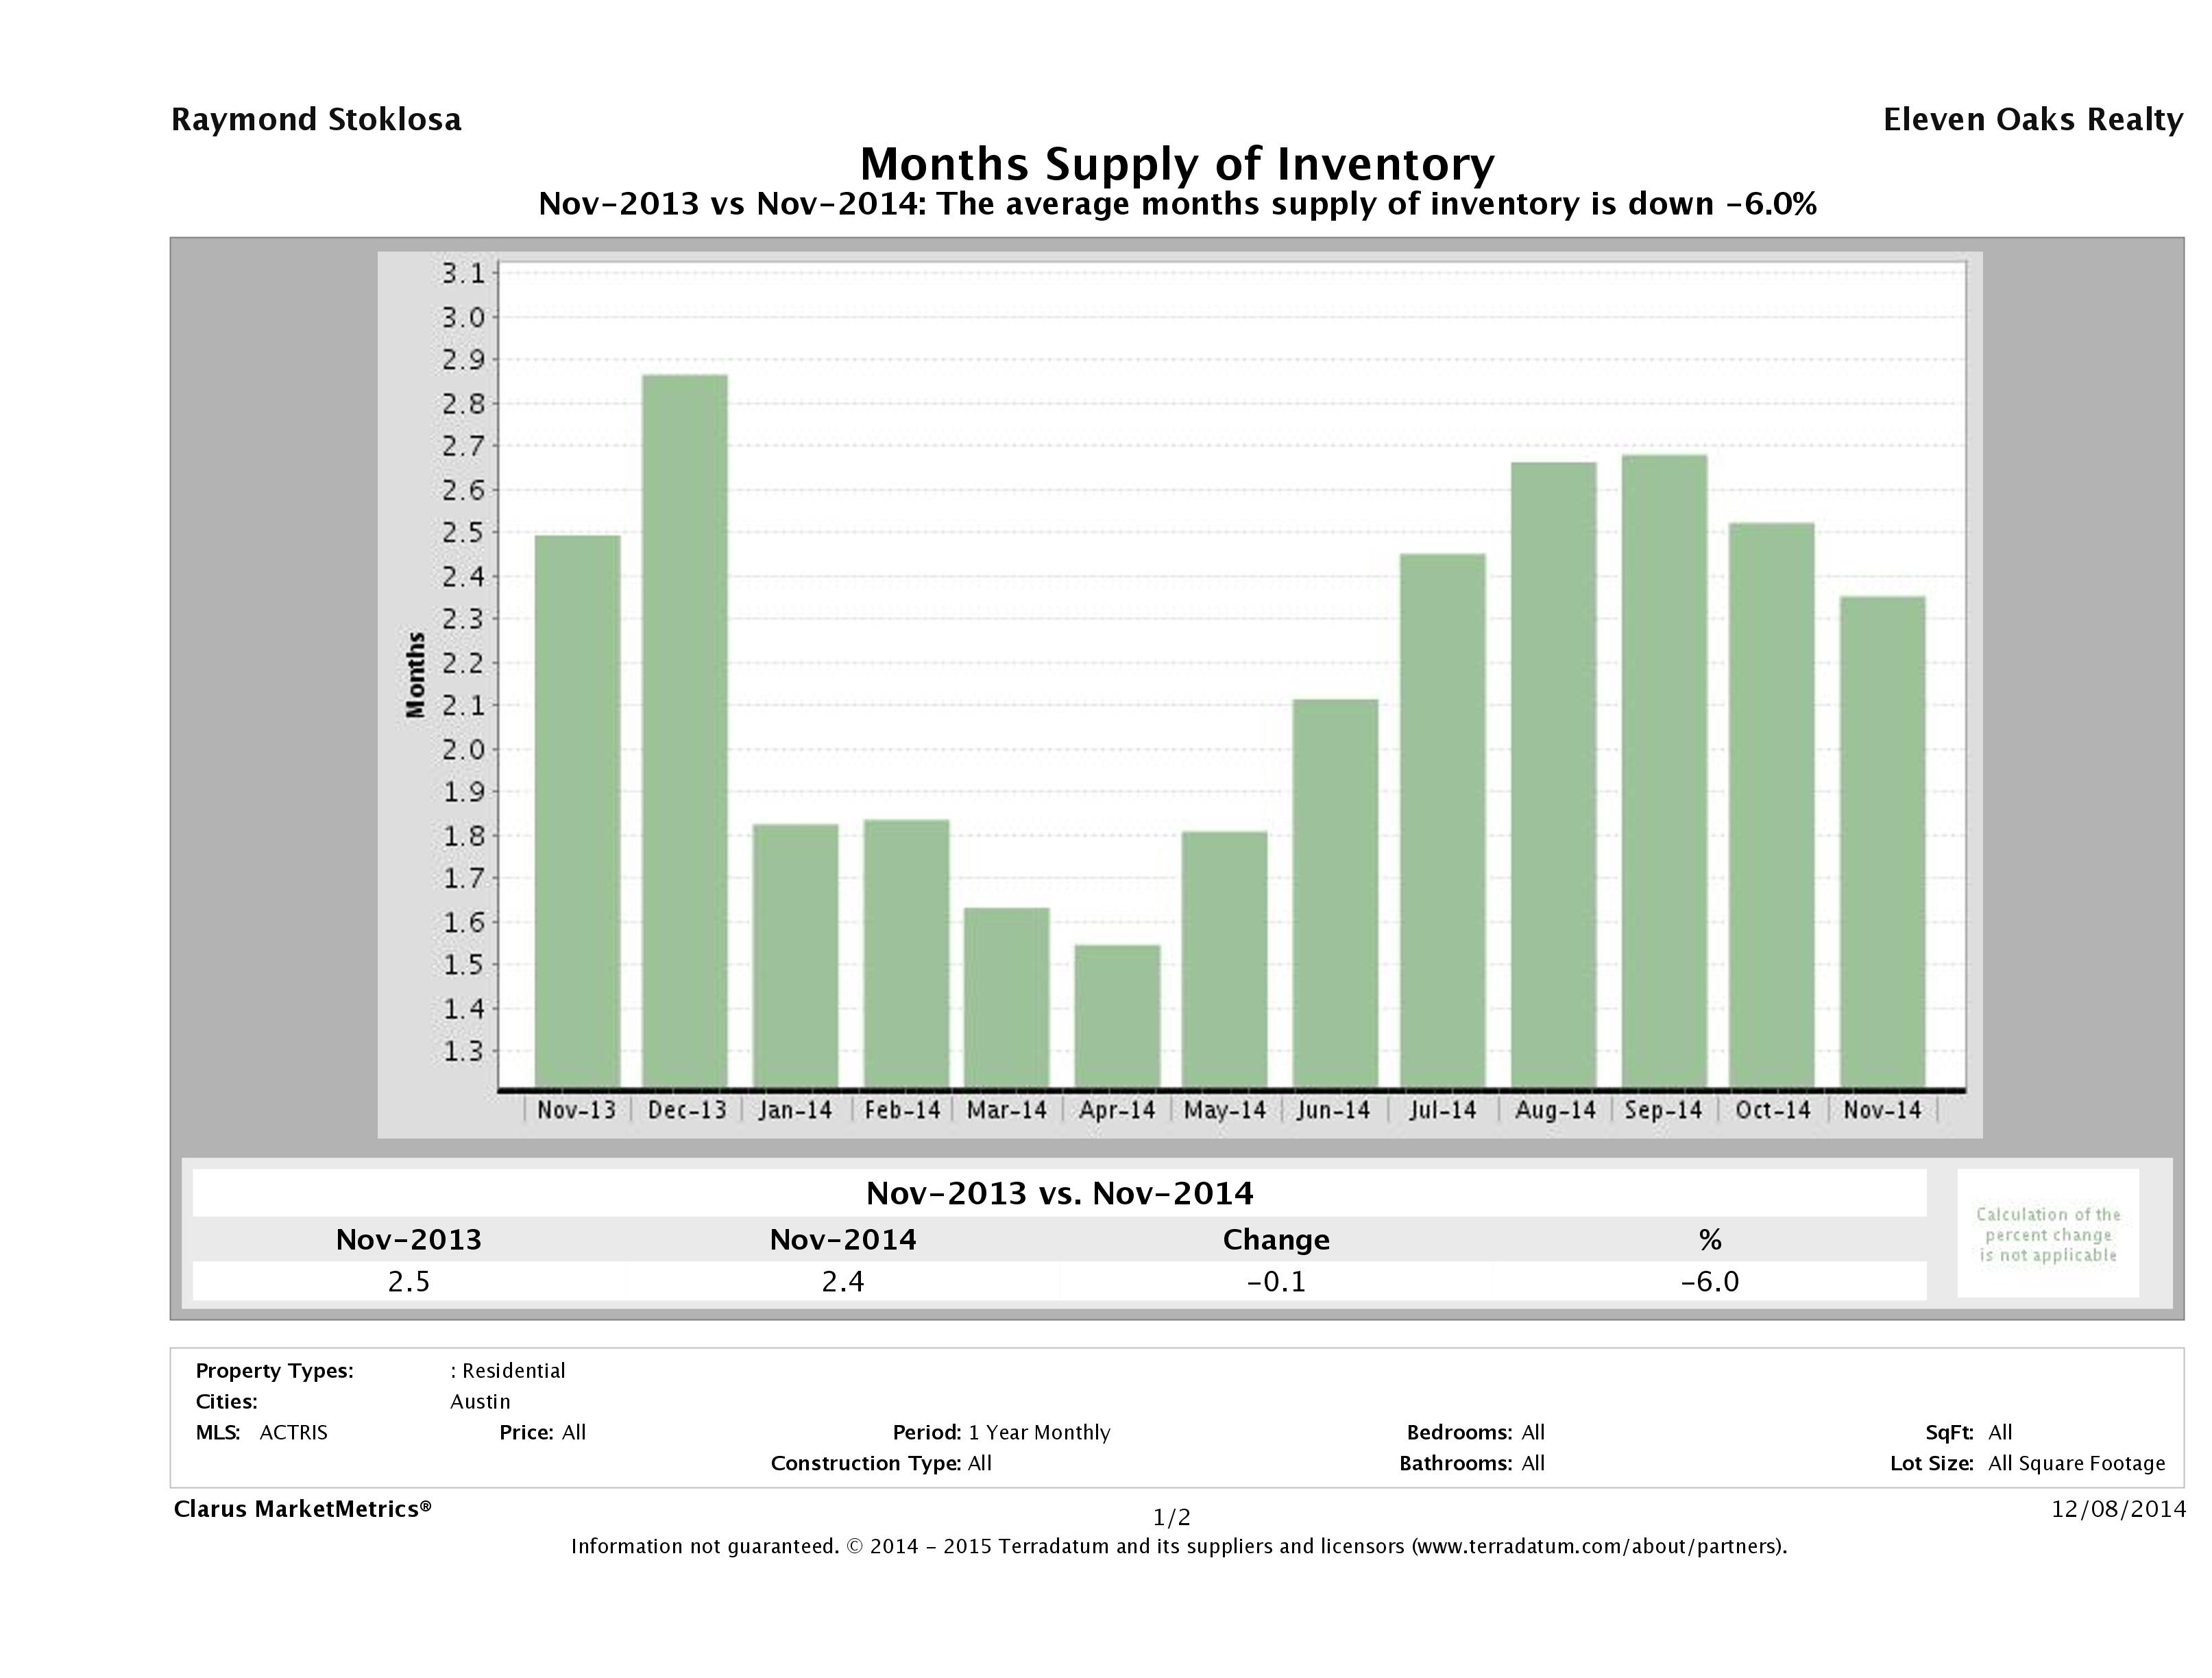 Austin single family home months inventory November 2014